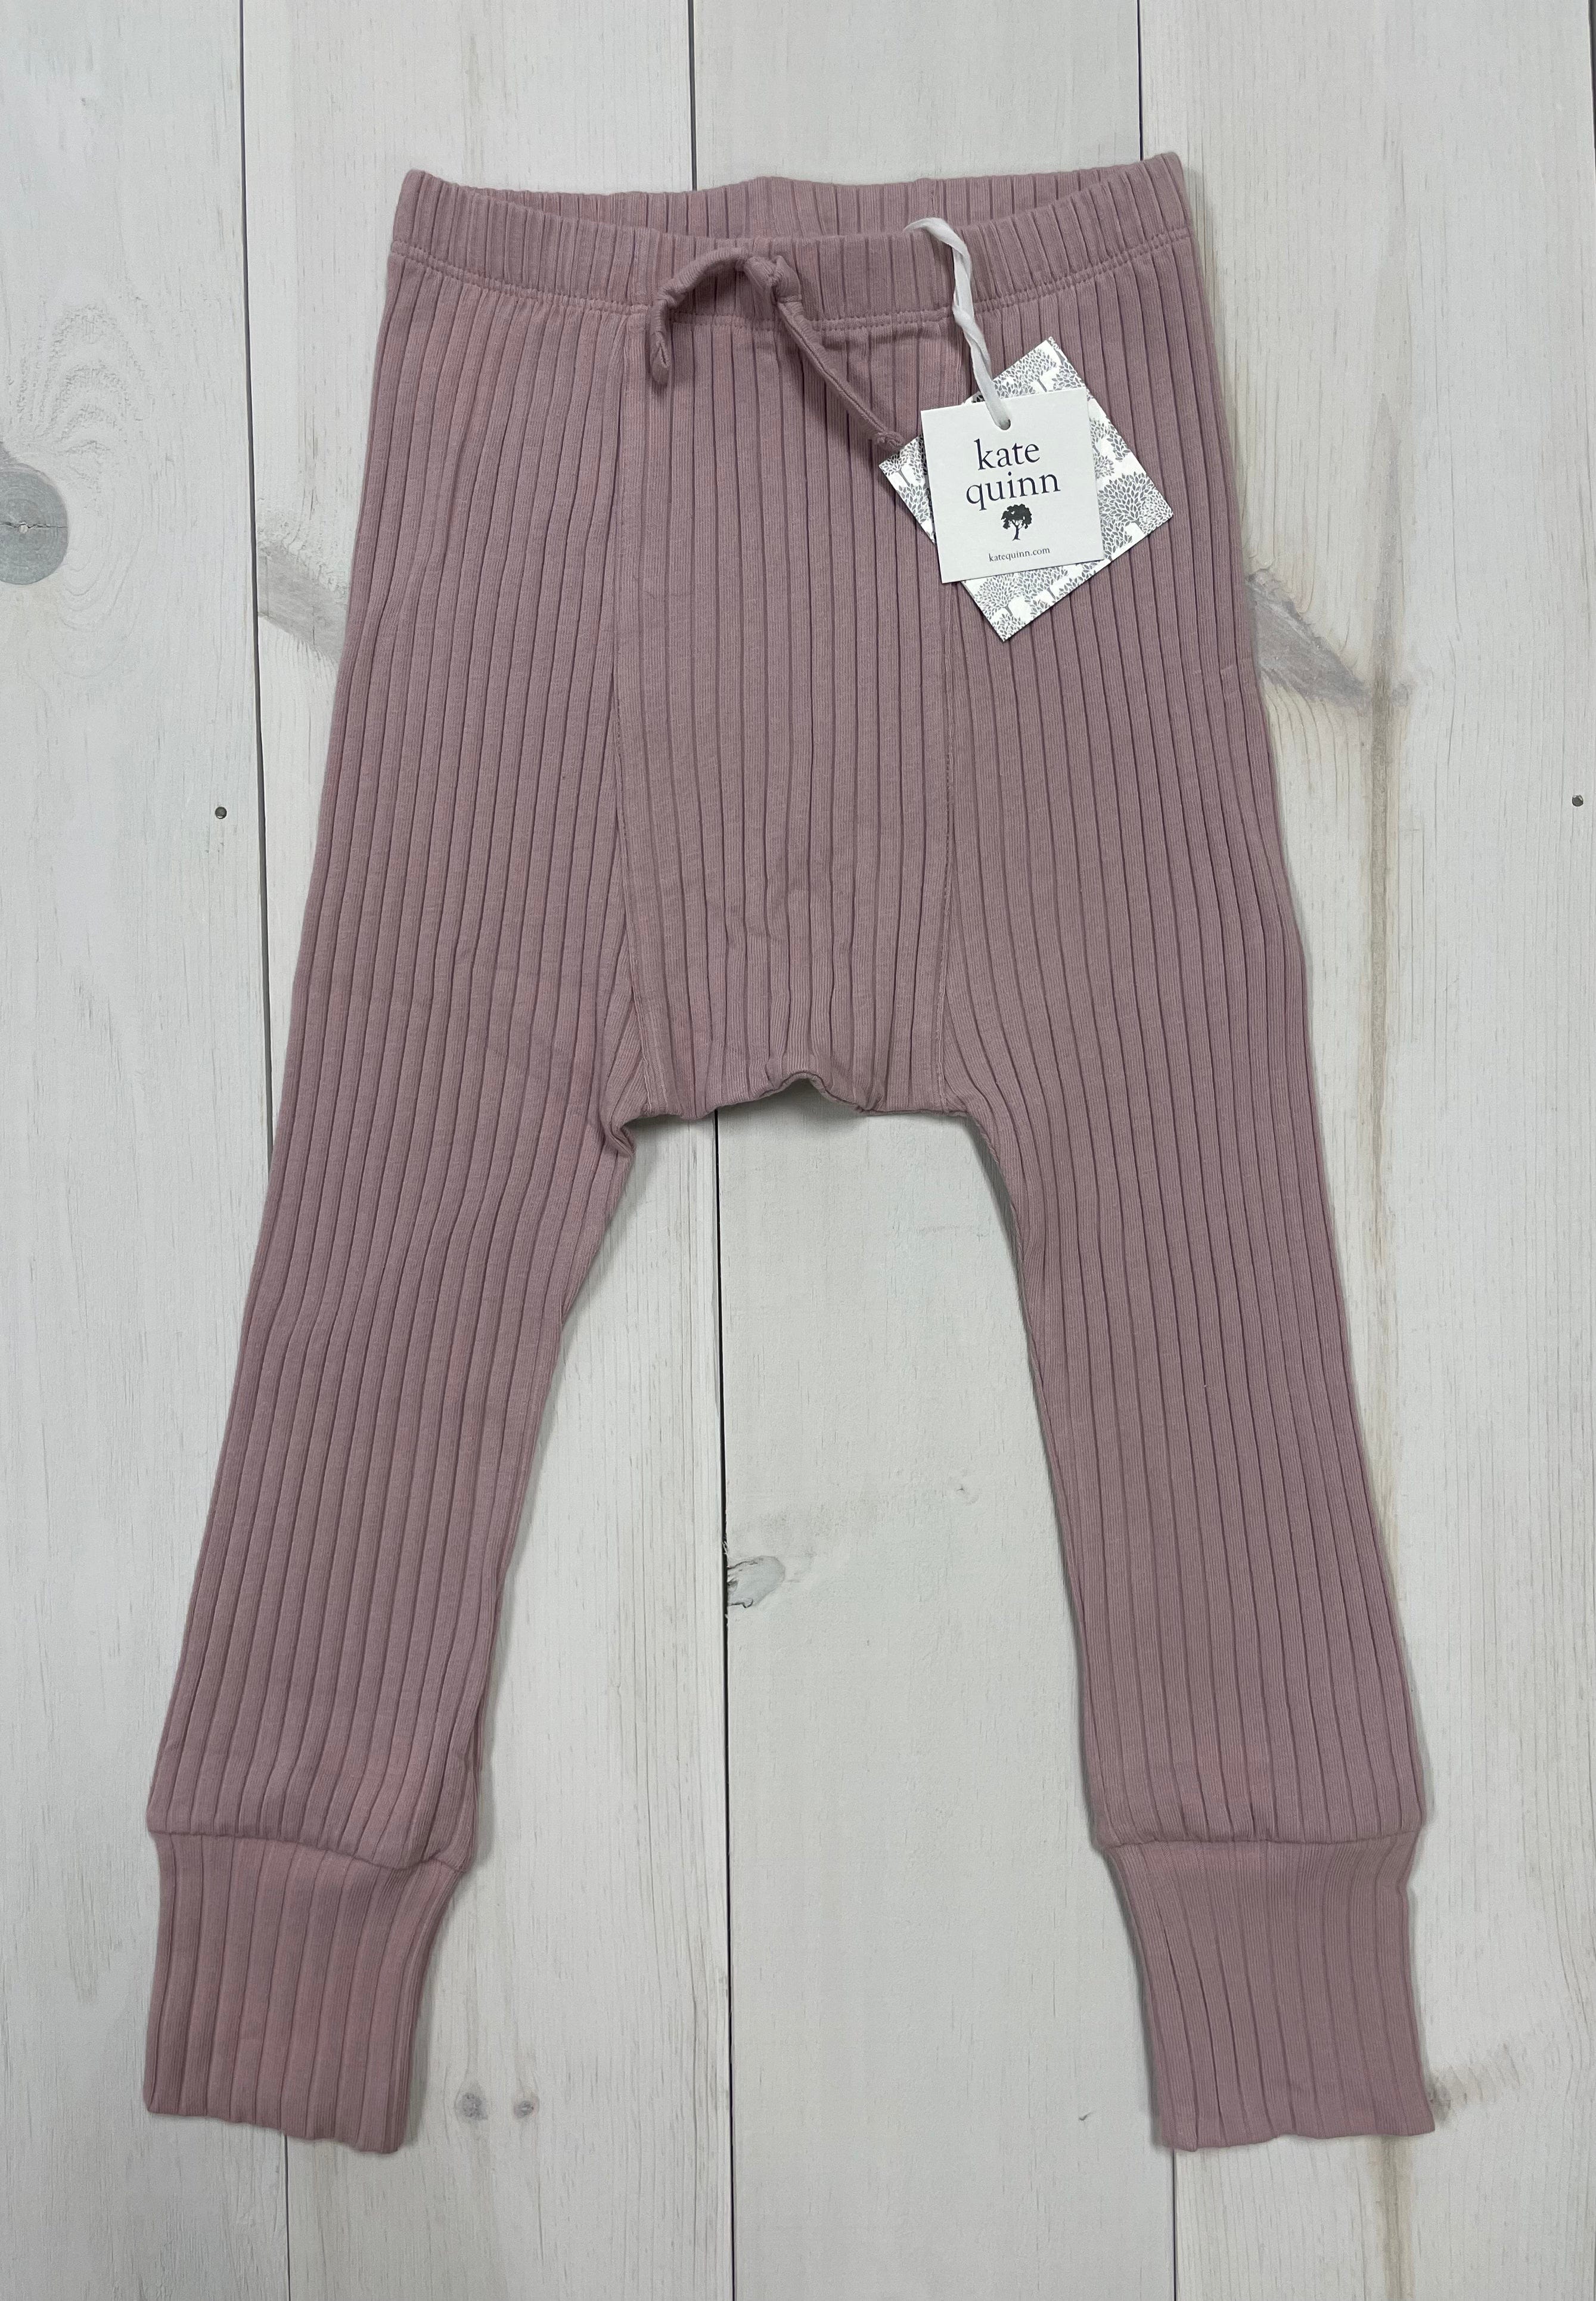 Minnows Childhood Goods Kate Quinn Organic Pants with Tags! 4T